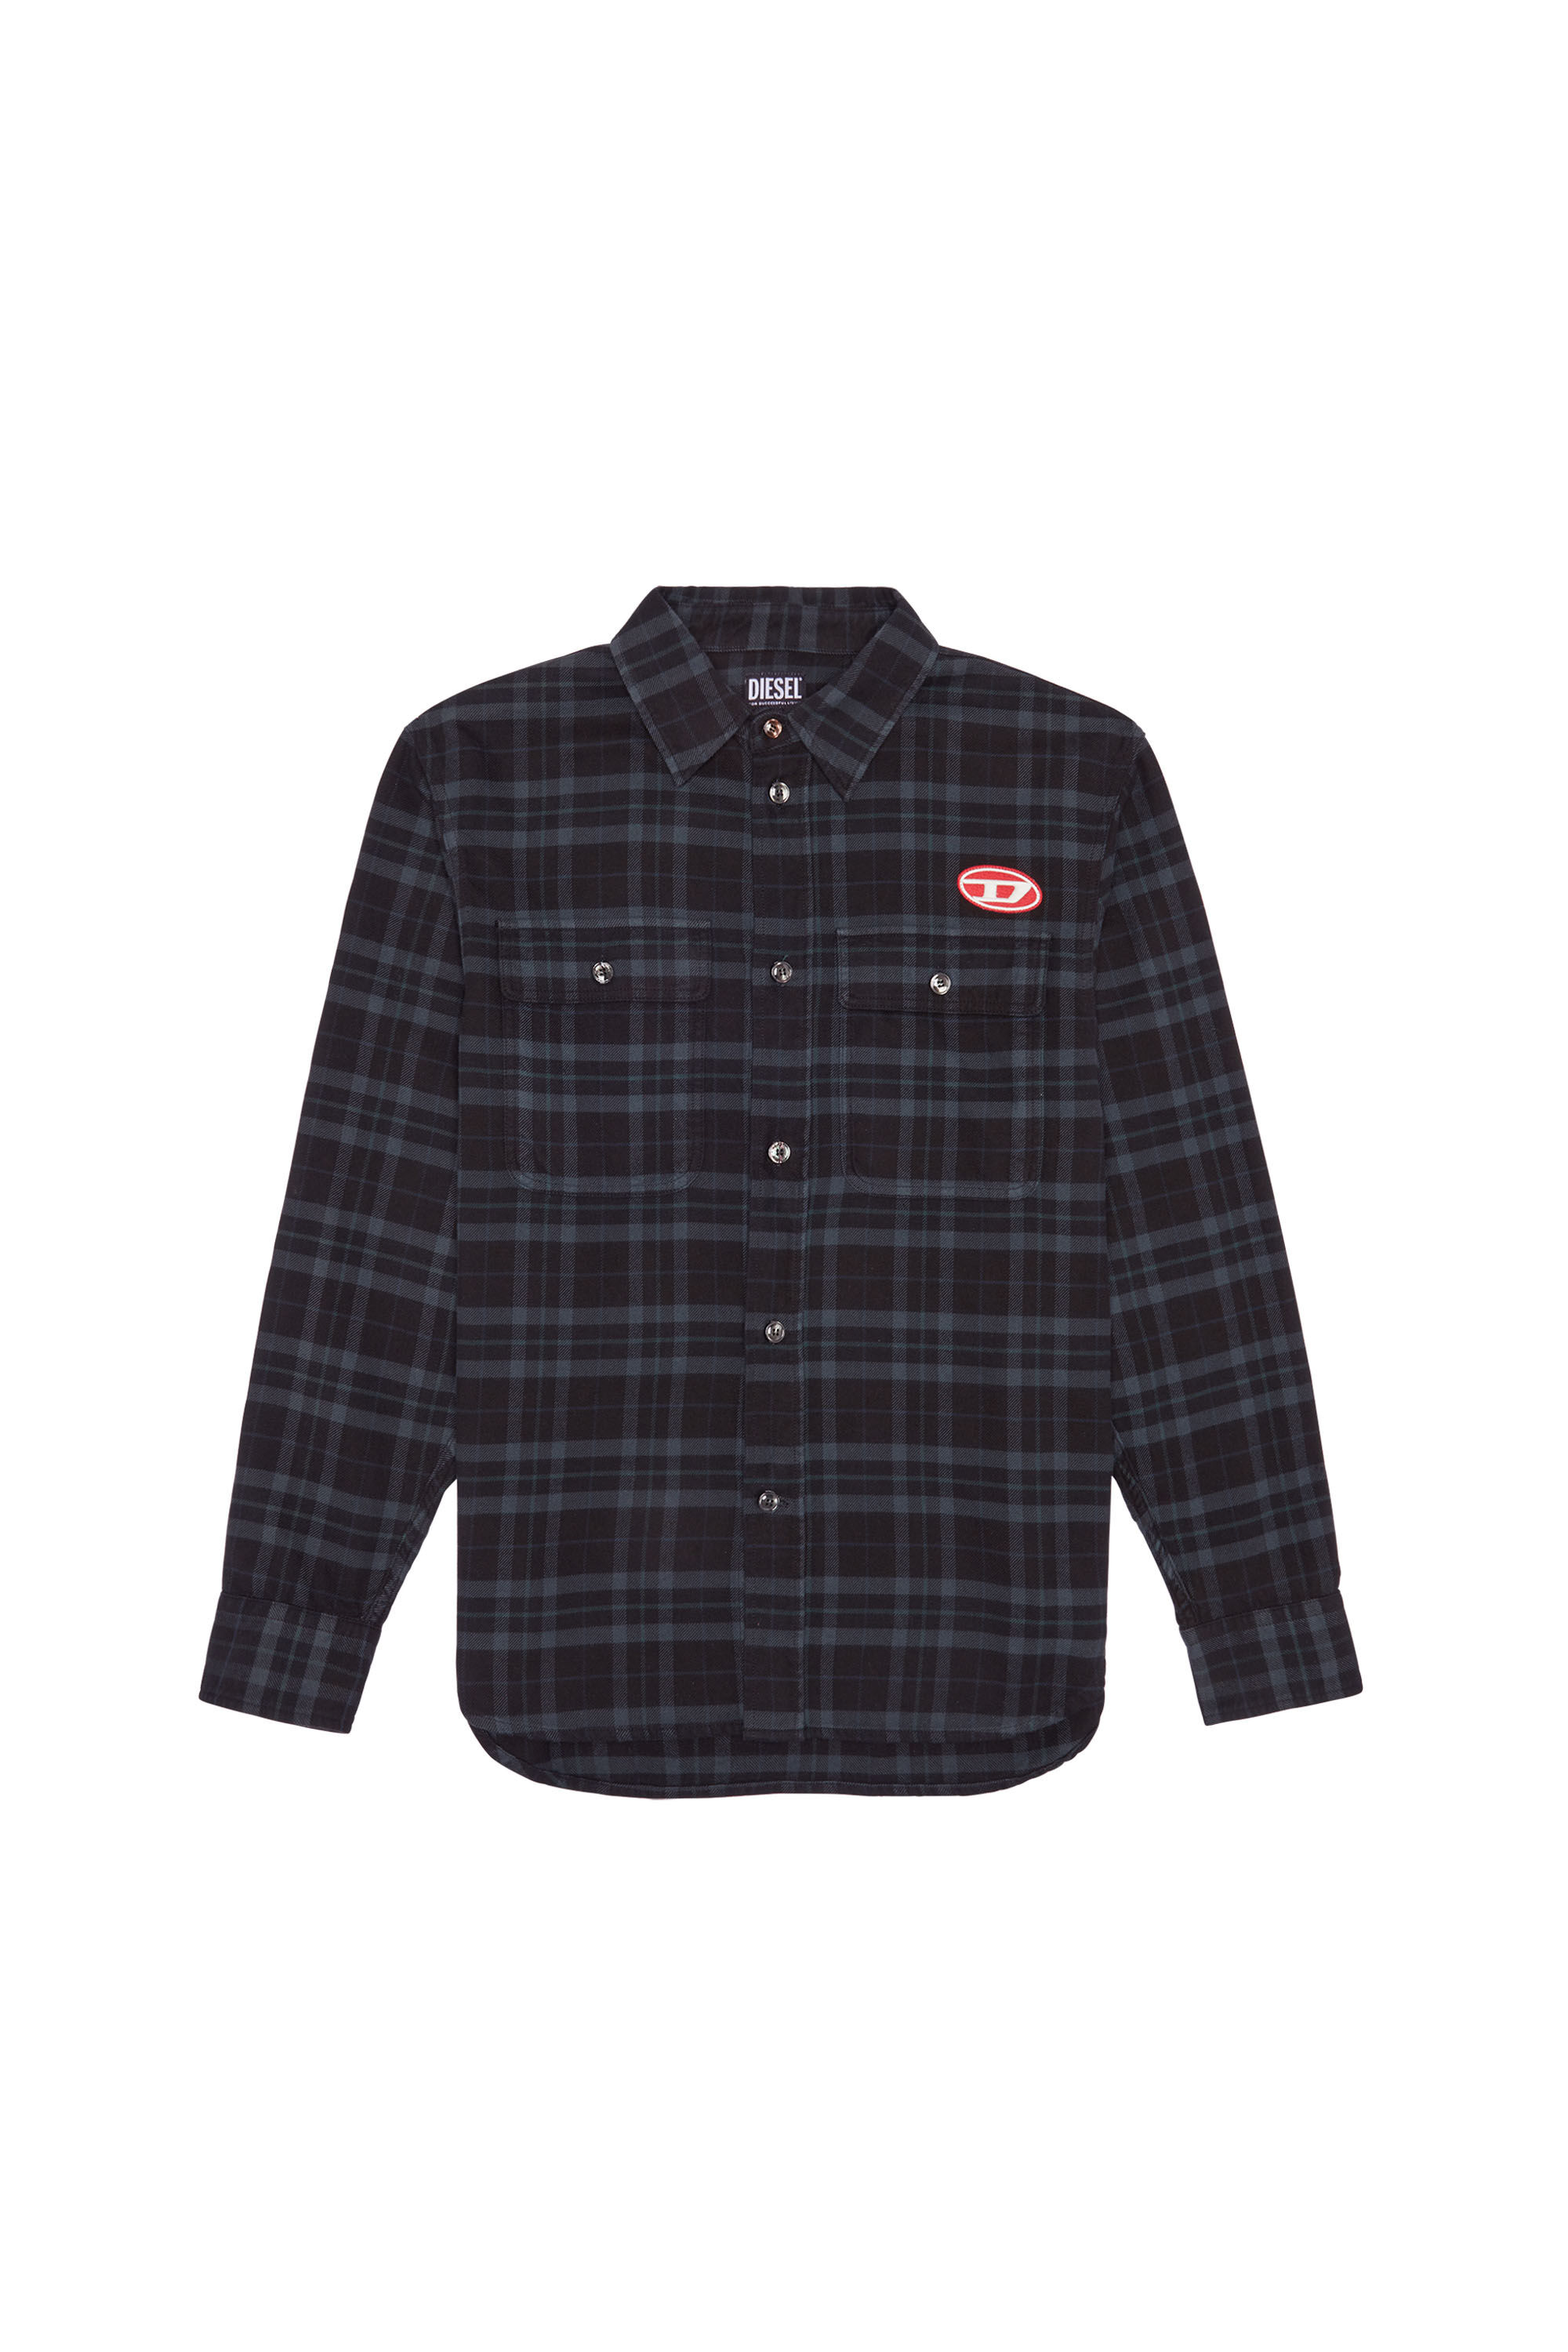 GRMO Men Loose Buttons Long Sleeve Classic Pocket Checked Shirts